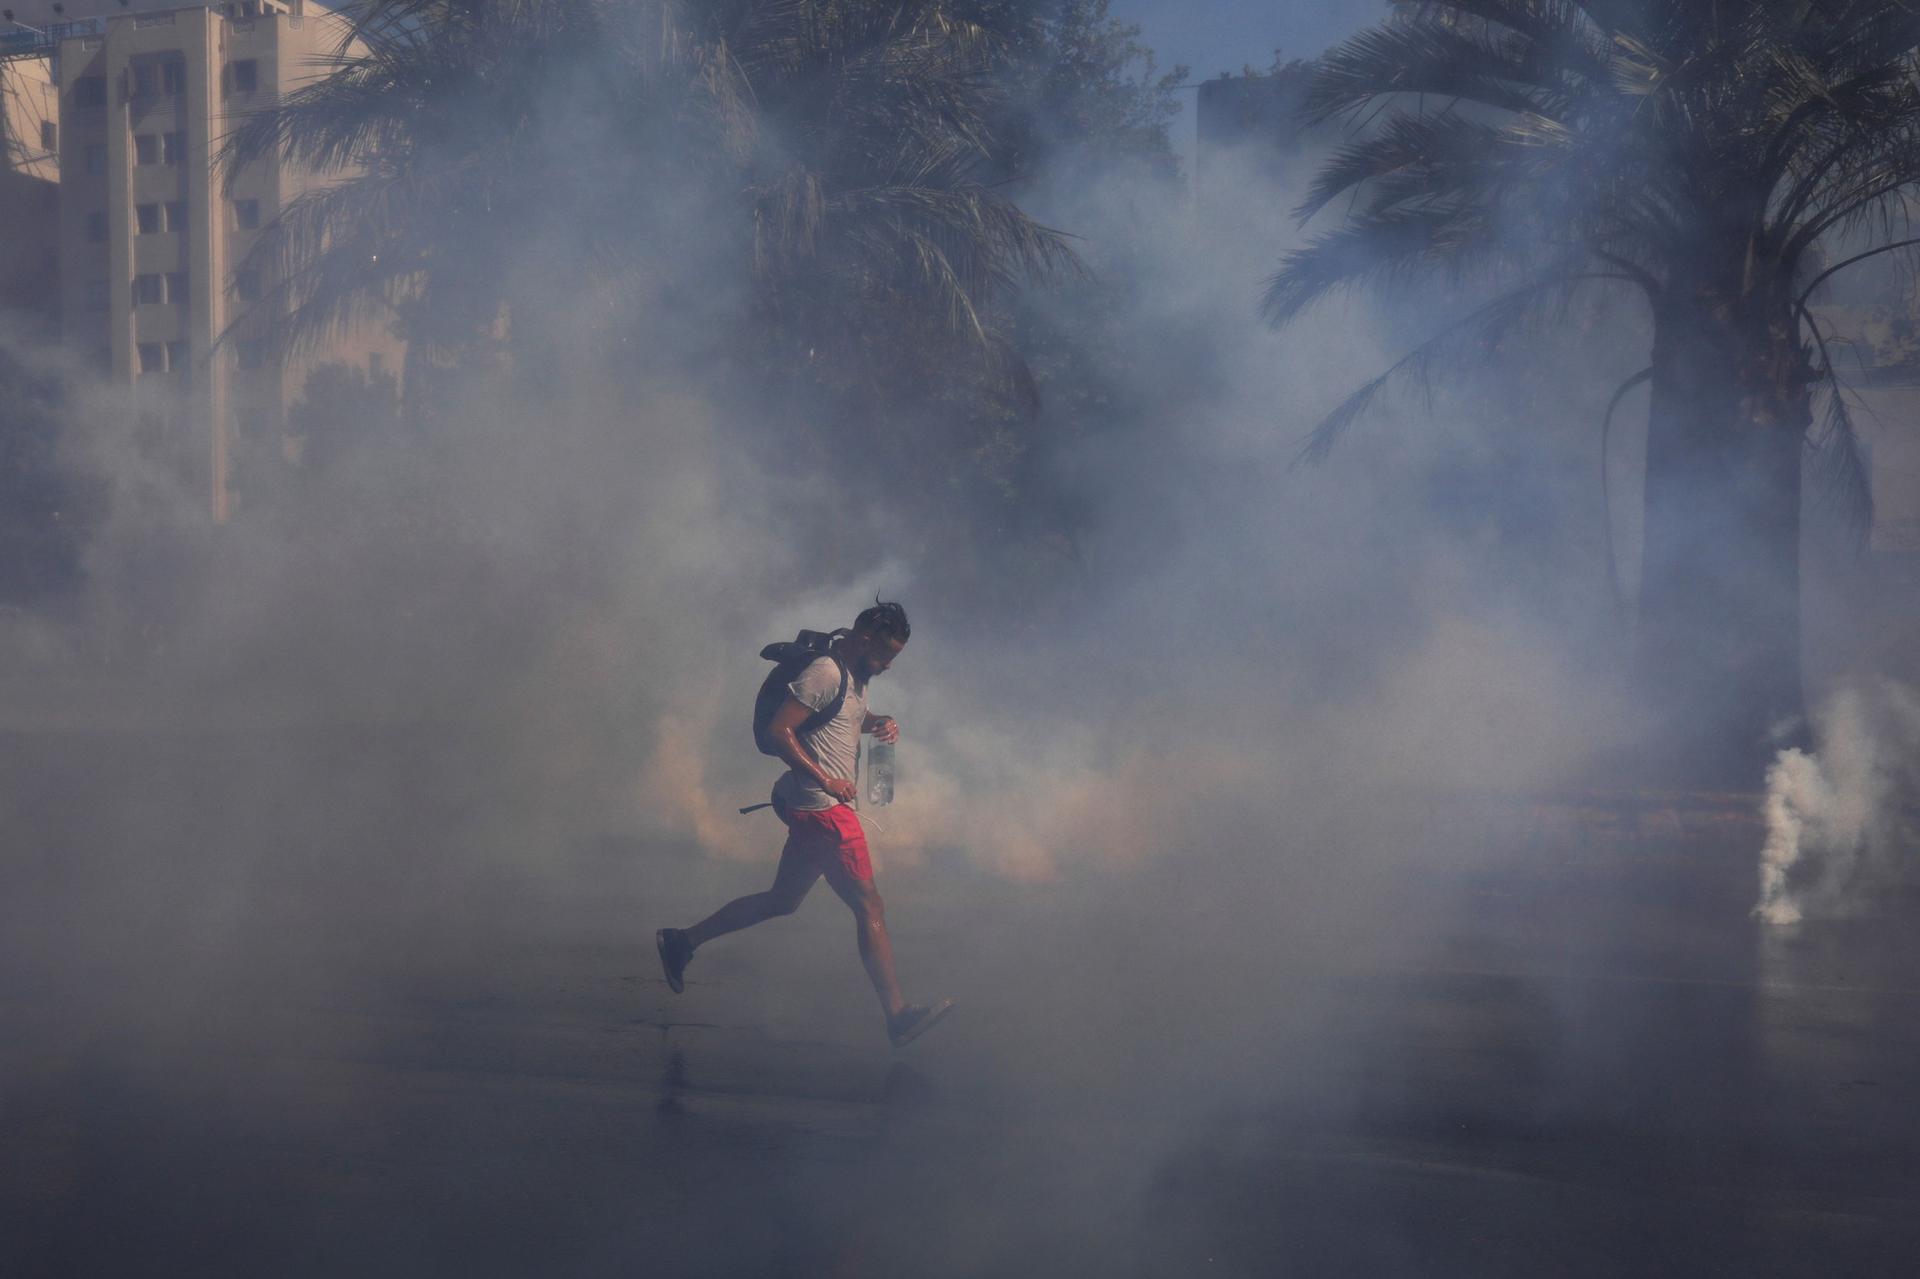 A demonstrator wearing red shorts and carrying a backpack, runs amid tear gas.